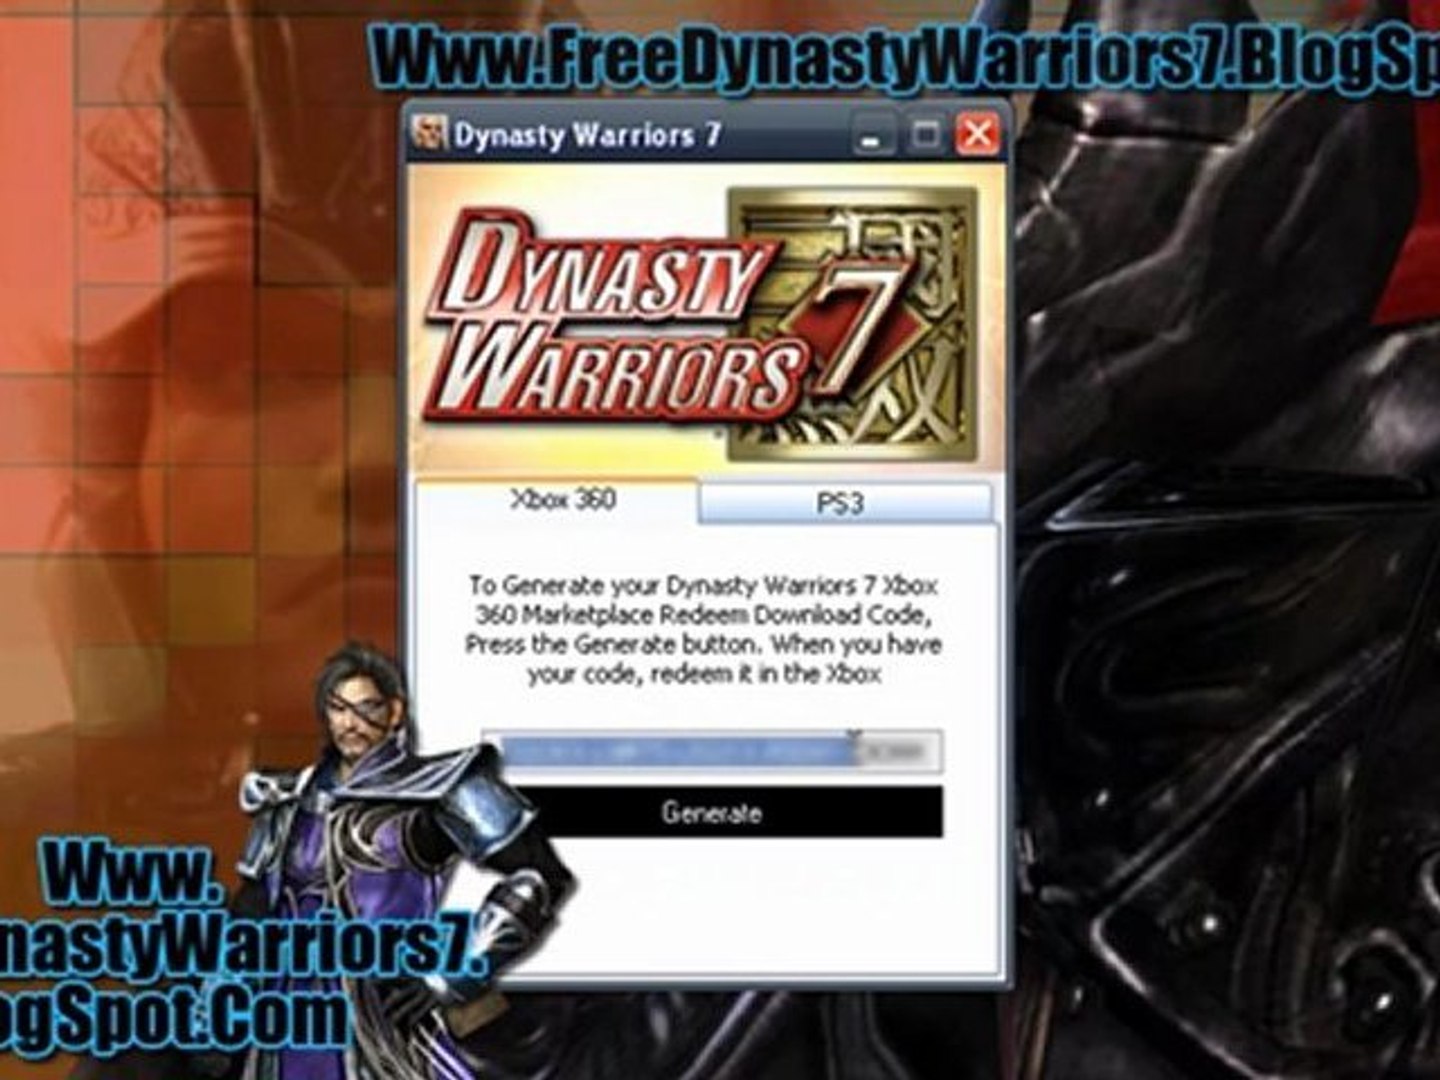 Install Dynasty Warriors 7 Free on Xbox 360 / PS3 - video Dailymotion